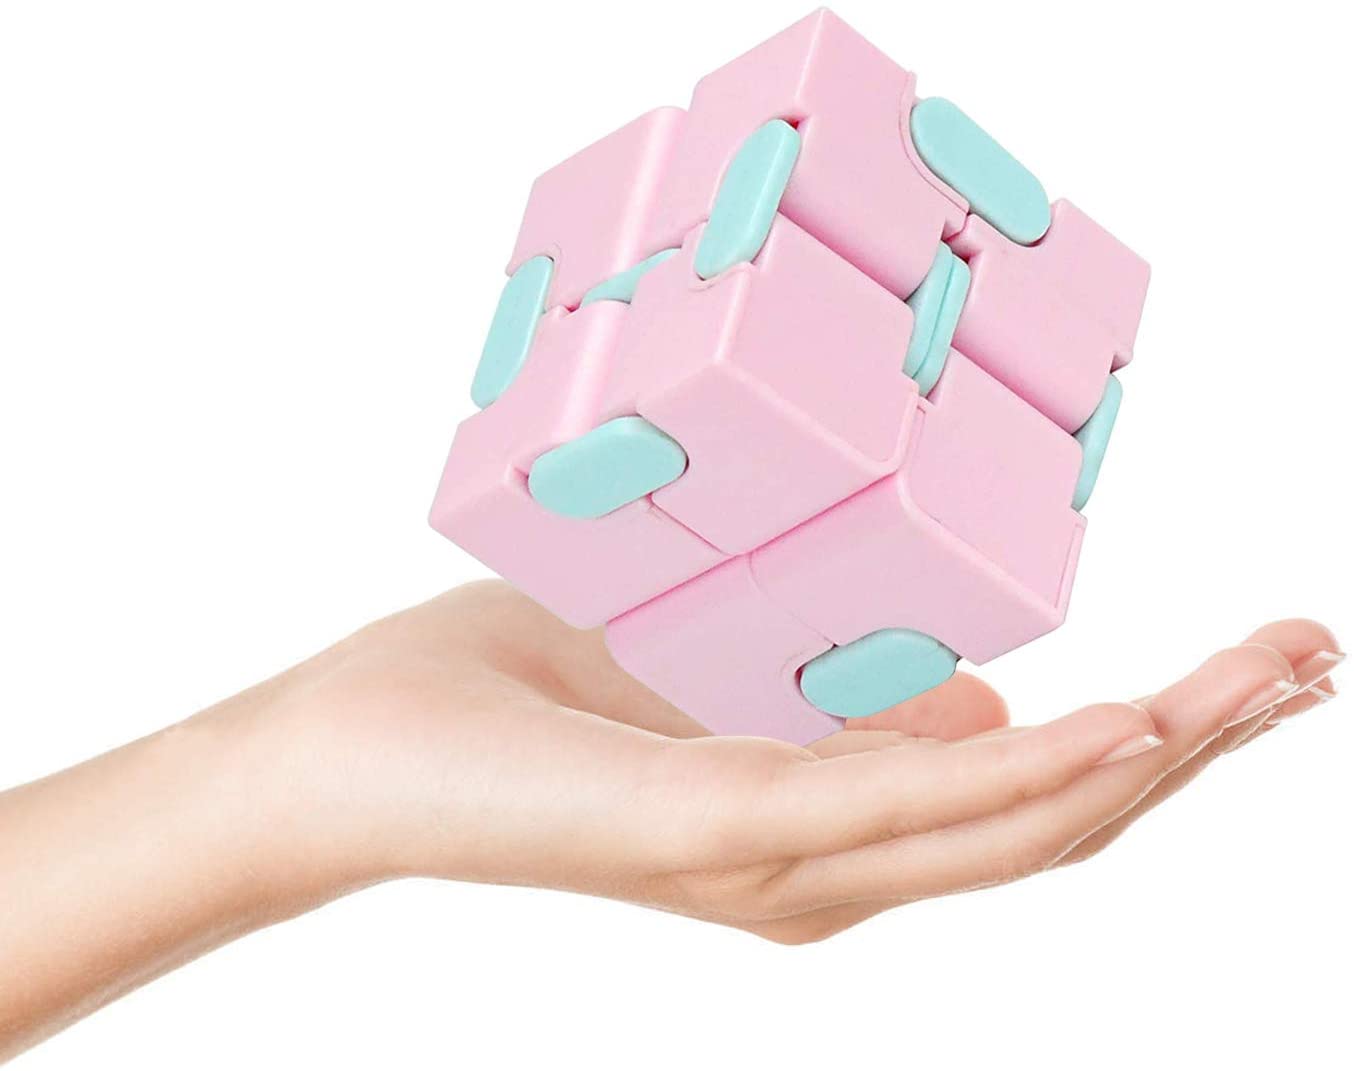 Details about  / Autism Anxiety Relief Kids Adult Gift Sensory Infinity Cube Stress Fidget Toys